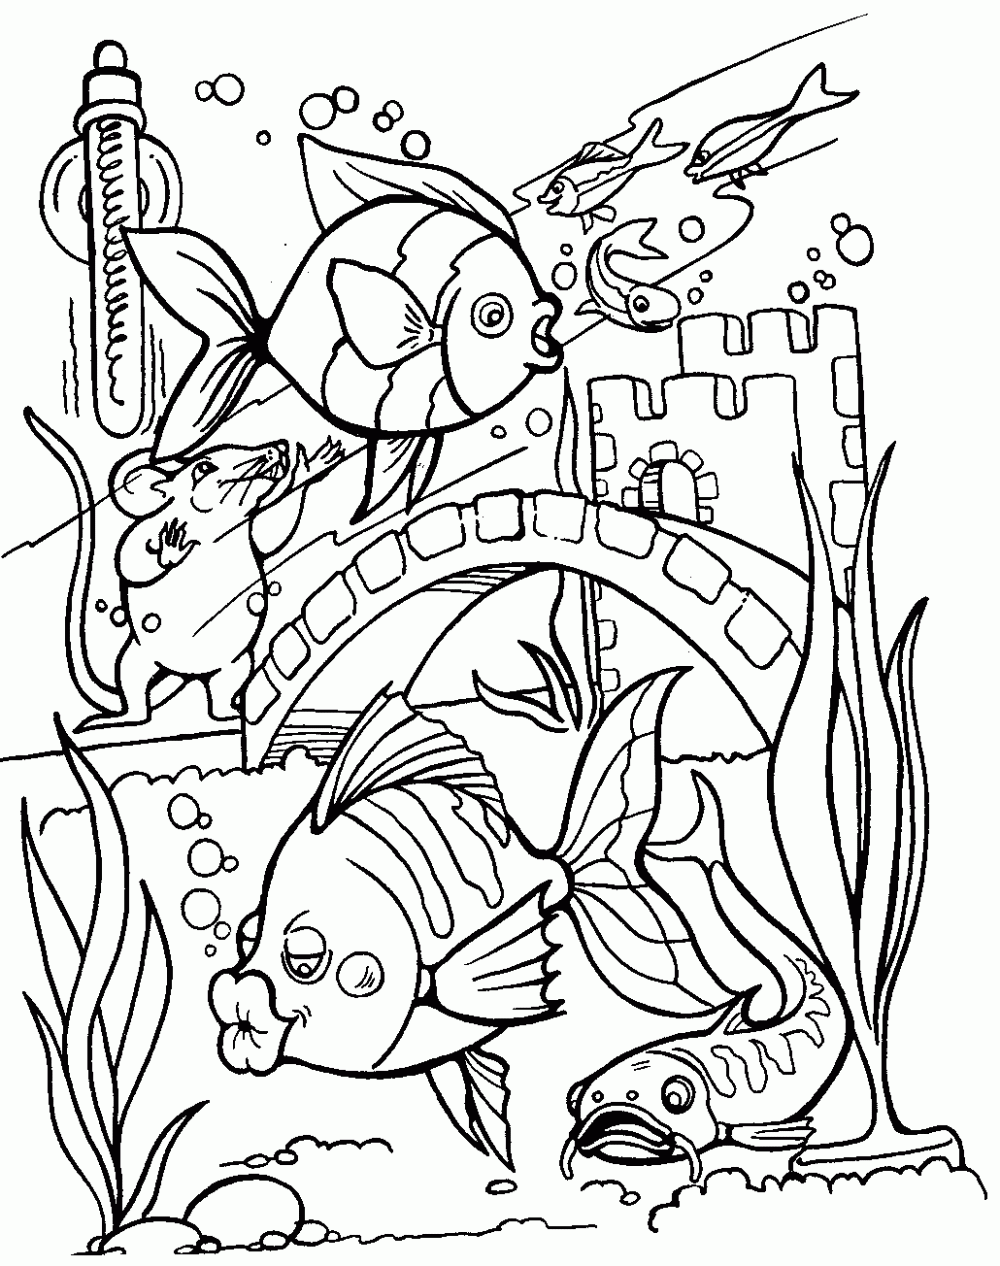 Awesome Fish Coloring Pages 2013 | Printable Coloring Pages